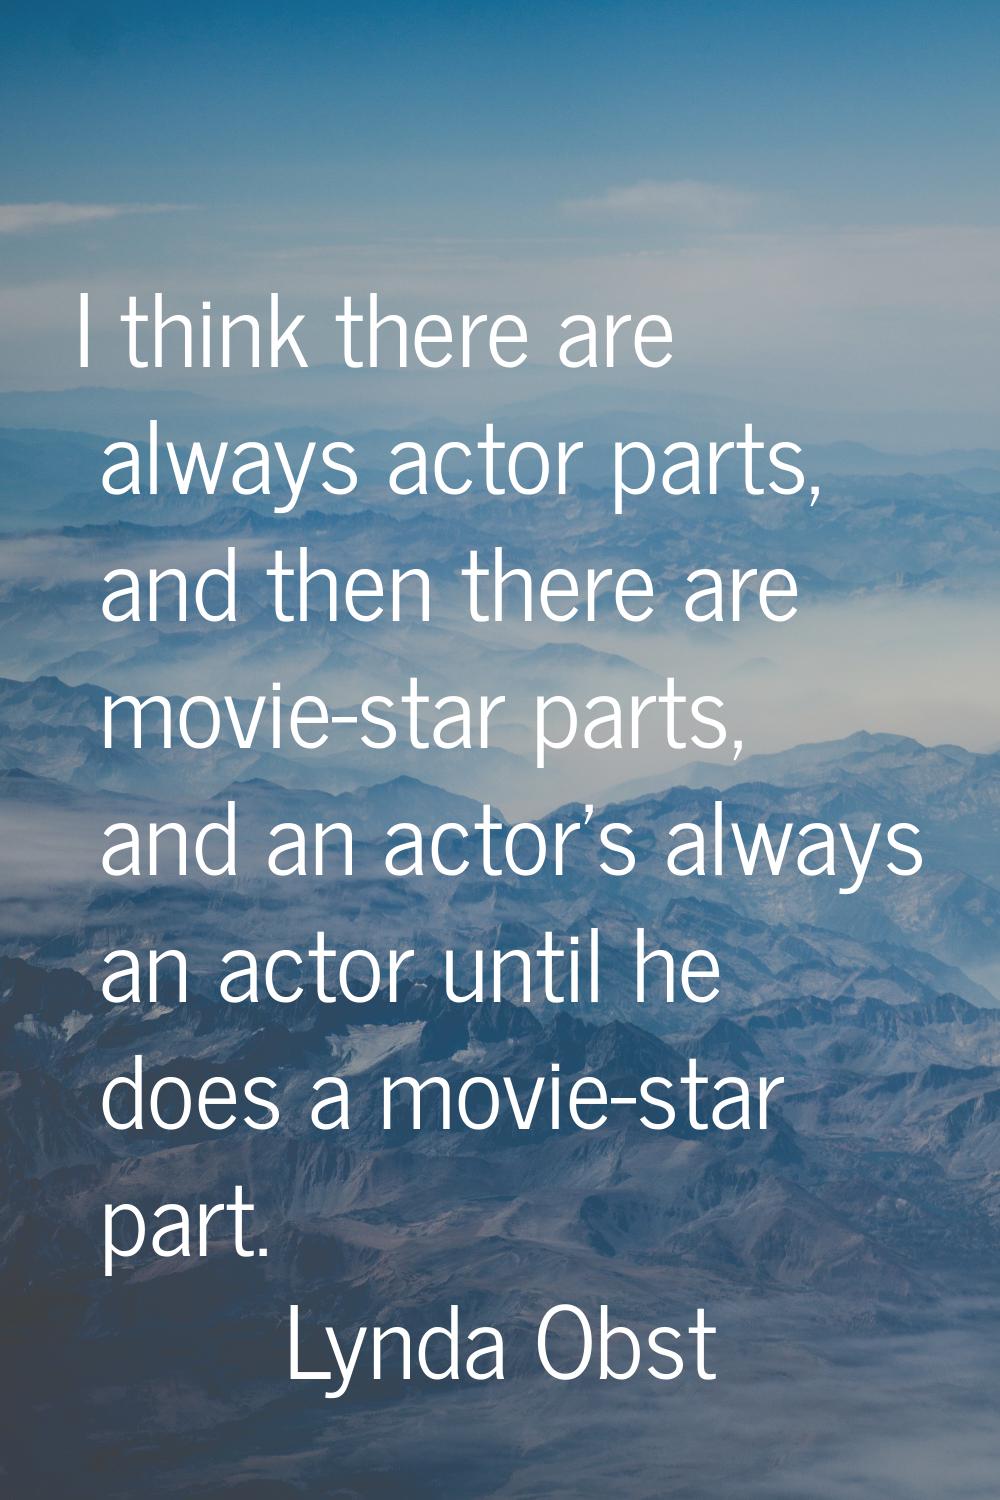 I think there are always actor parts, and then there are movie-star parts, and an actor's always an